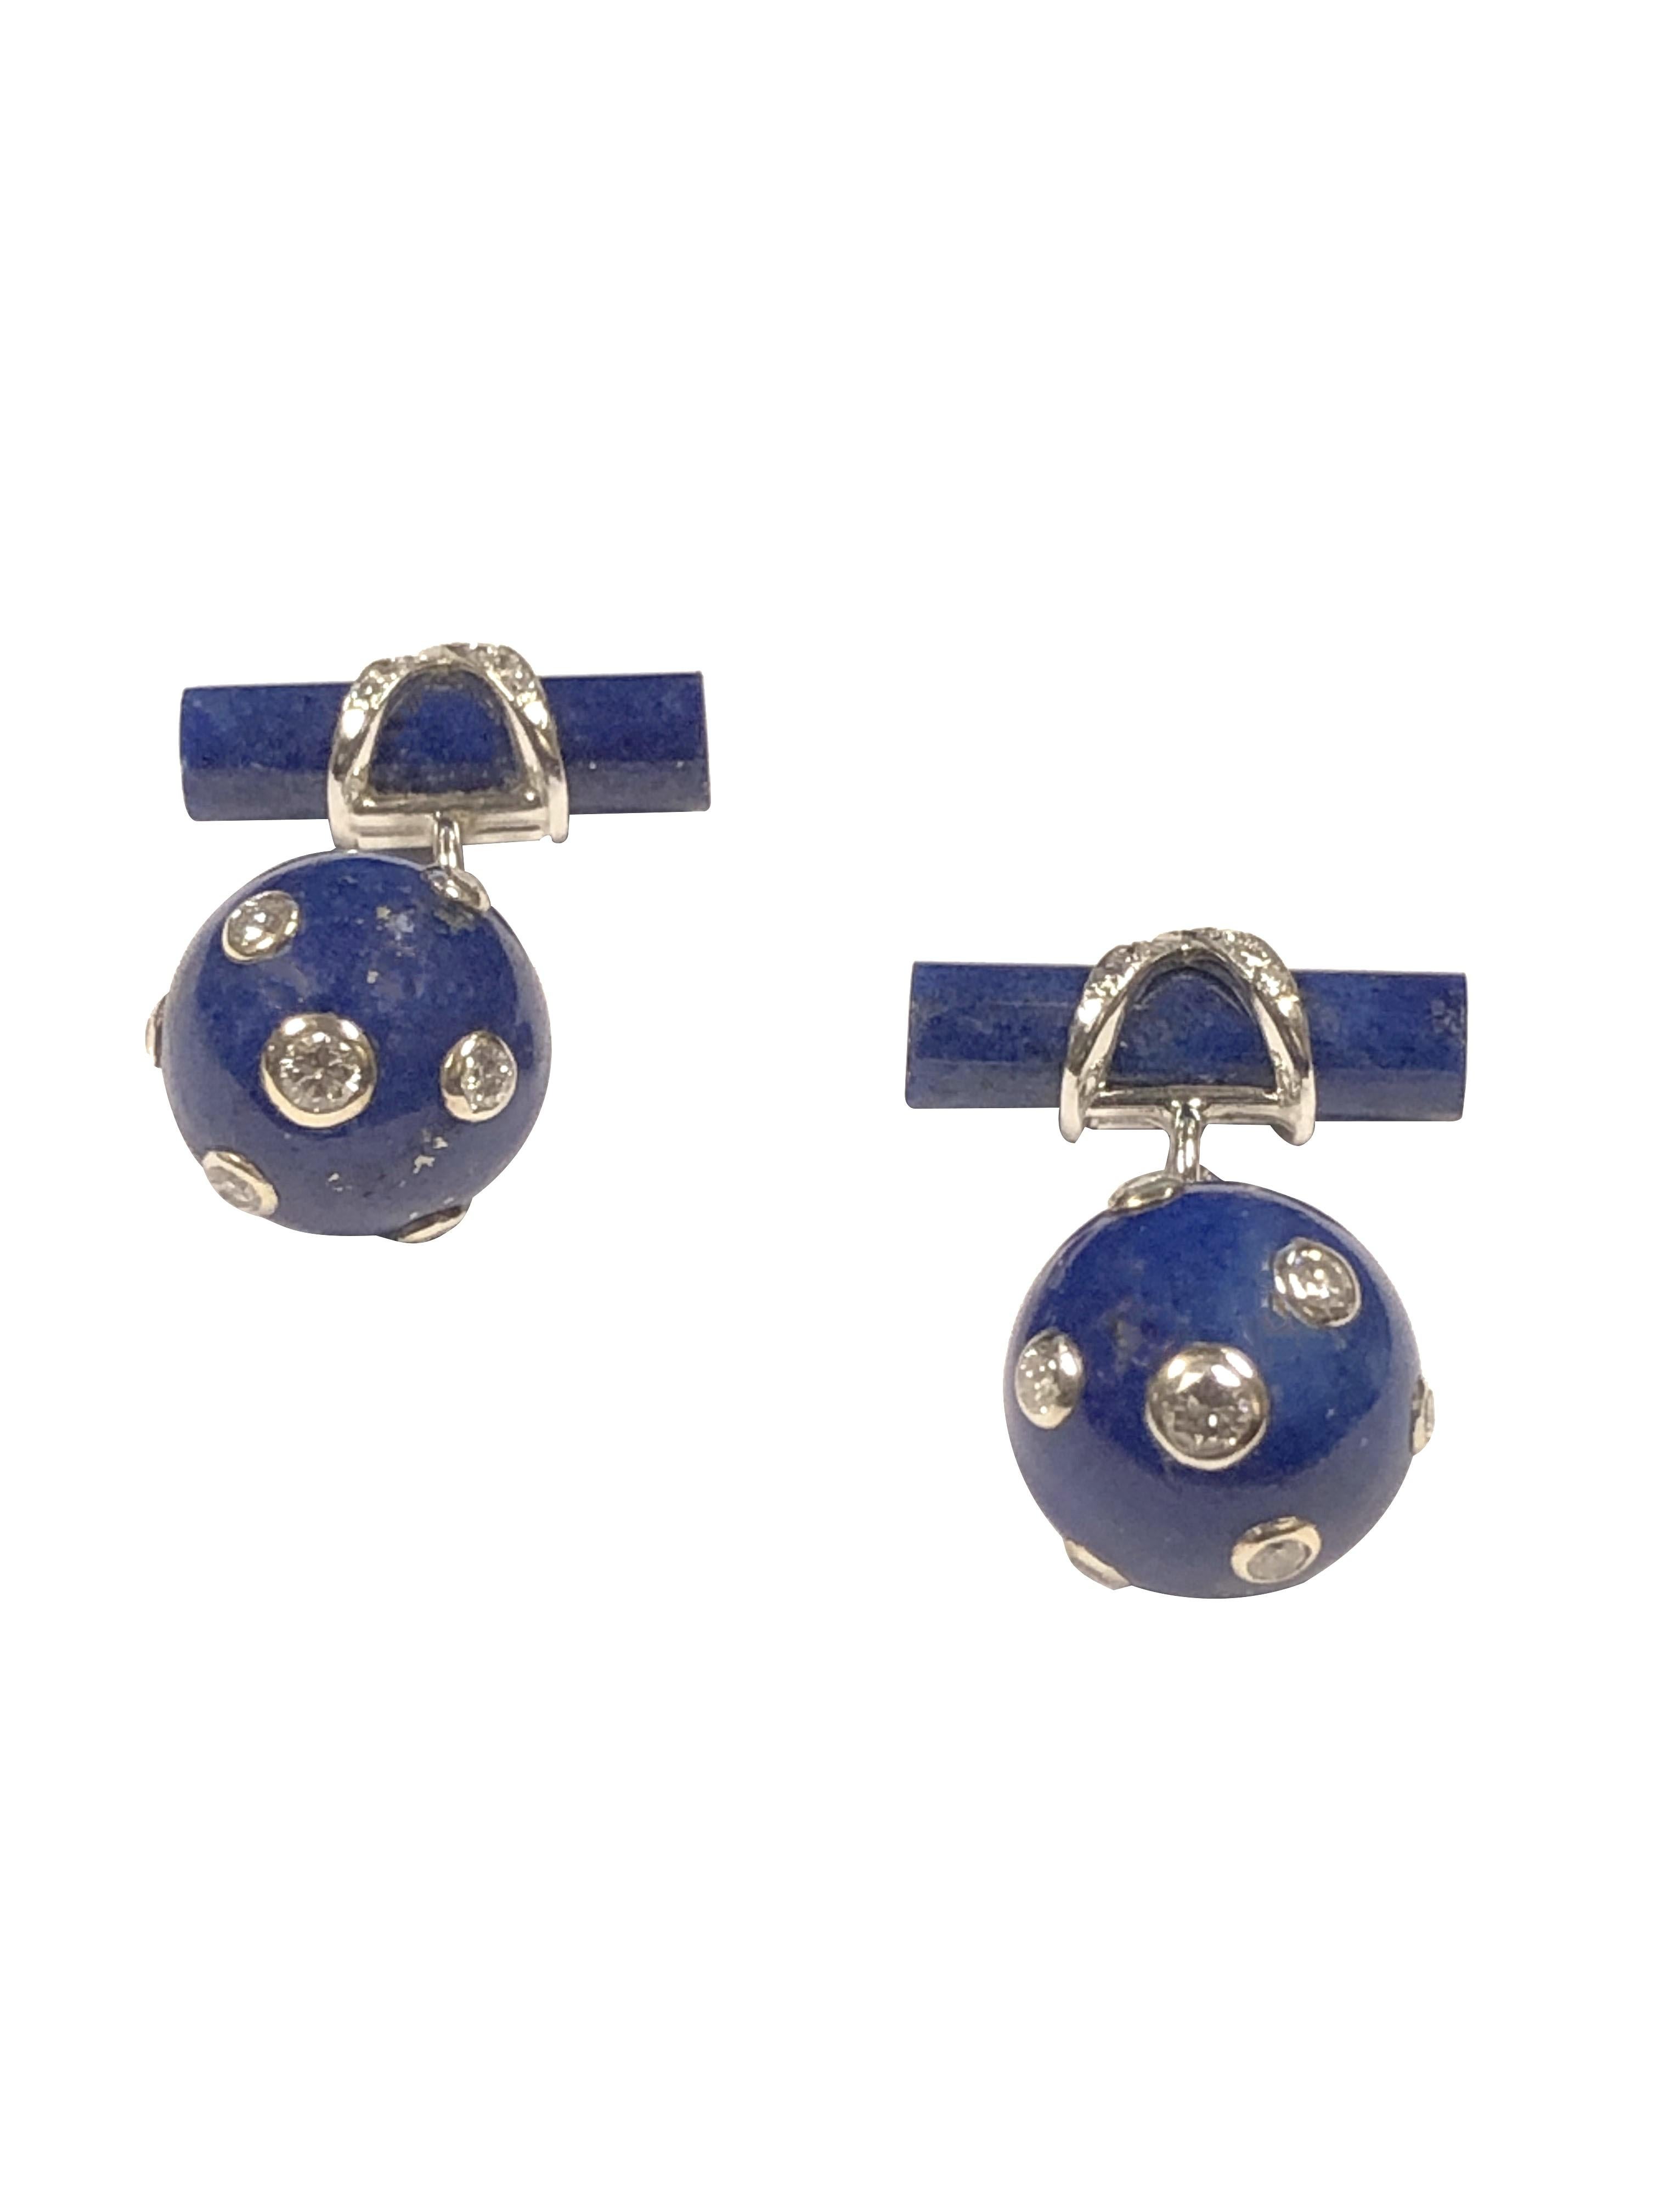 Circa 2000 Verdura Cufflinks, Comprised of a Lapis Lazuli Ball measuring 1/2 inch and diameter, 7 Gold bezel set Round Brilliant cut Diamonds, a white gold chain connects a Lapis Bar that has a Diamond set X decoration. Diamond total weight for the